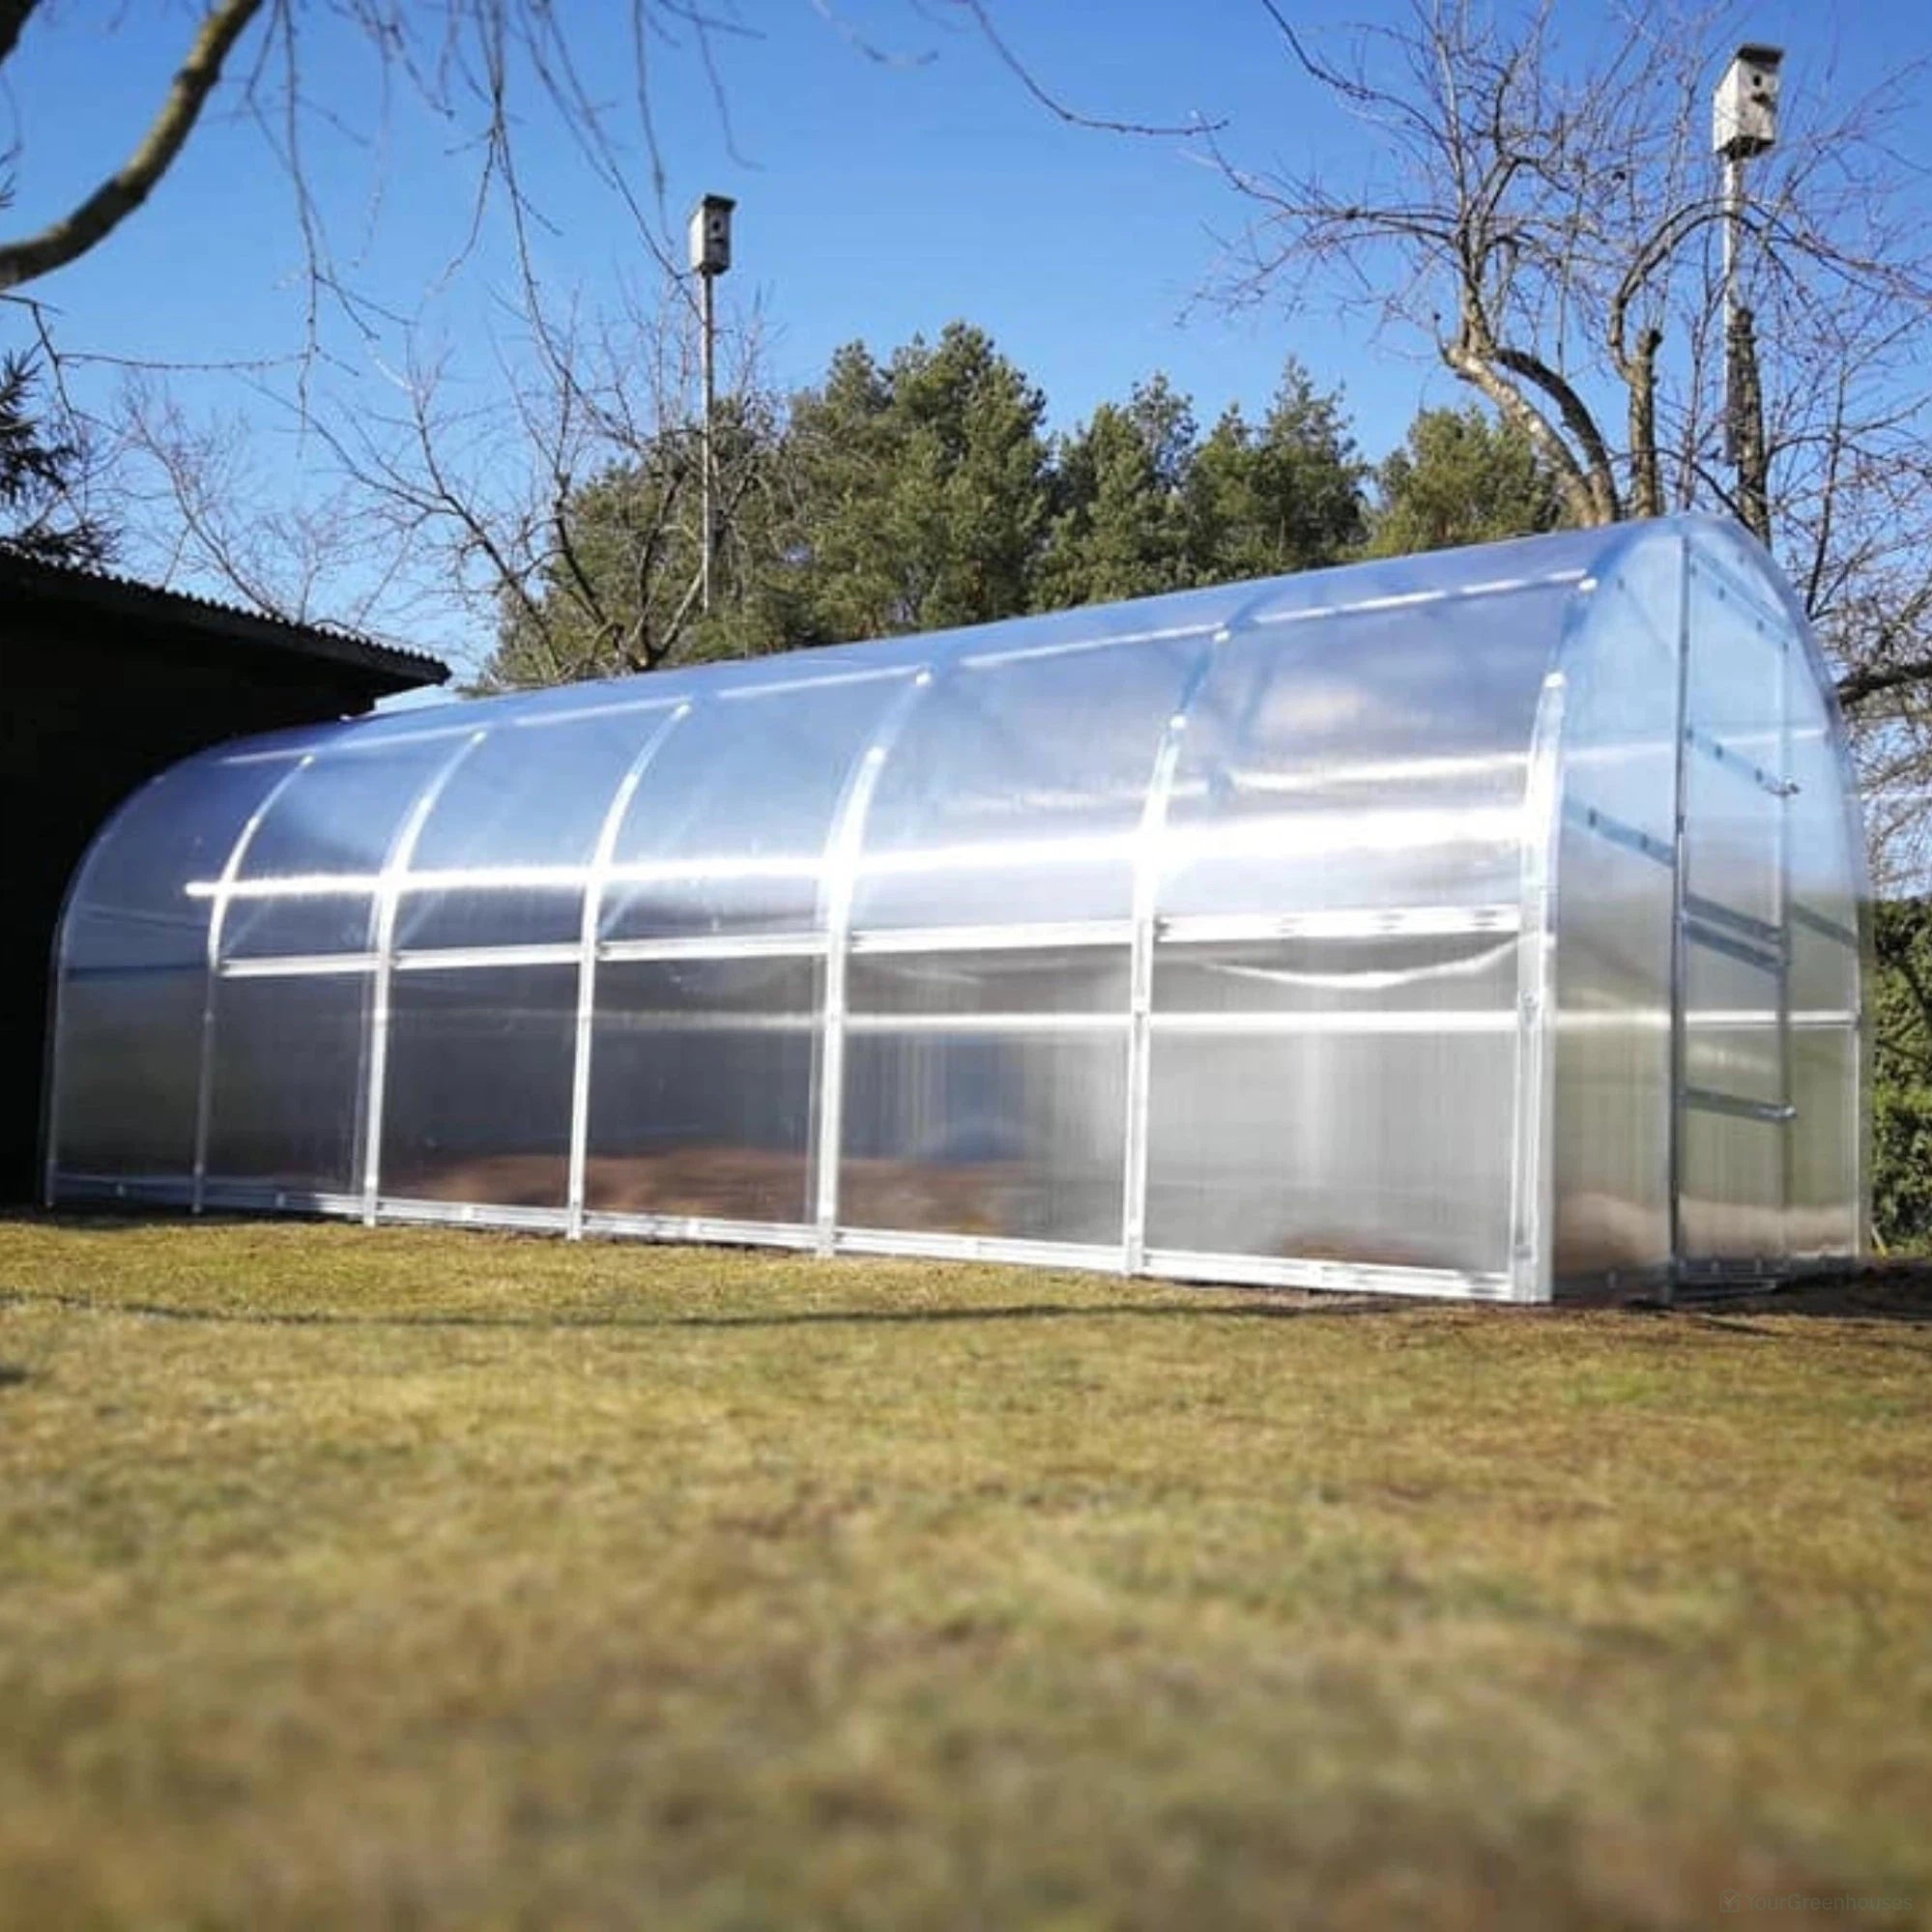 worlds most popular greenhouse in the backyard with trees behind